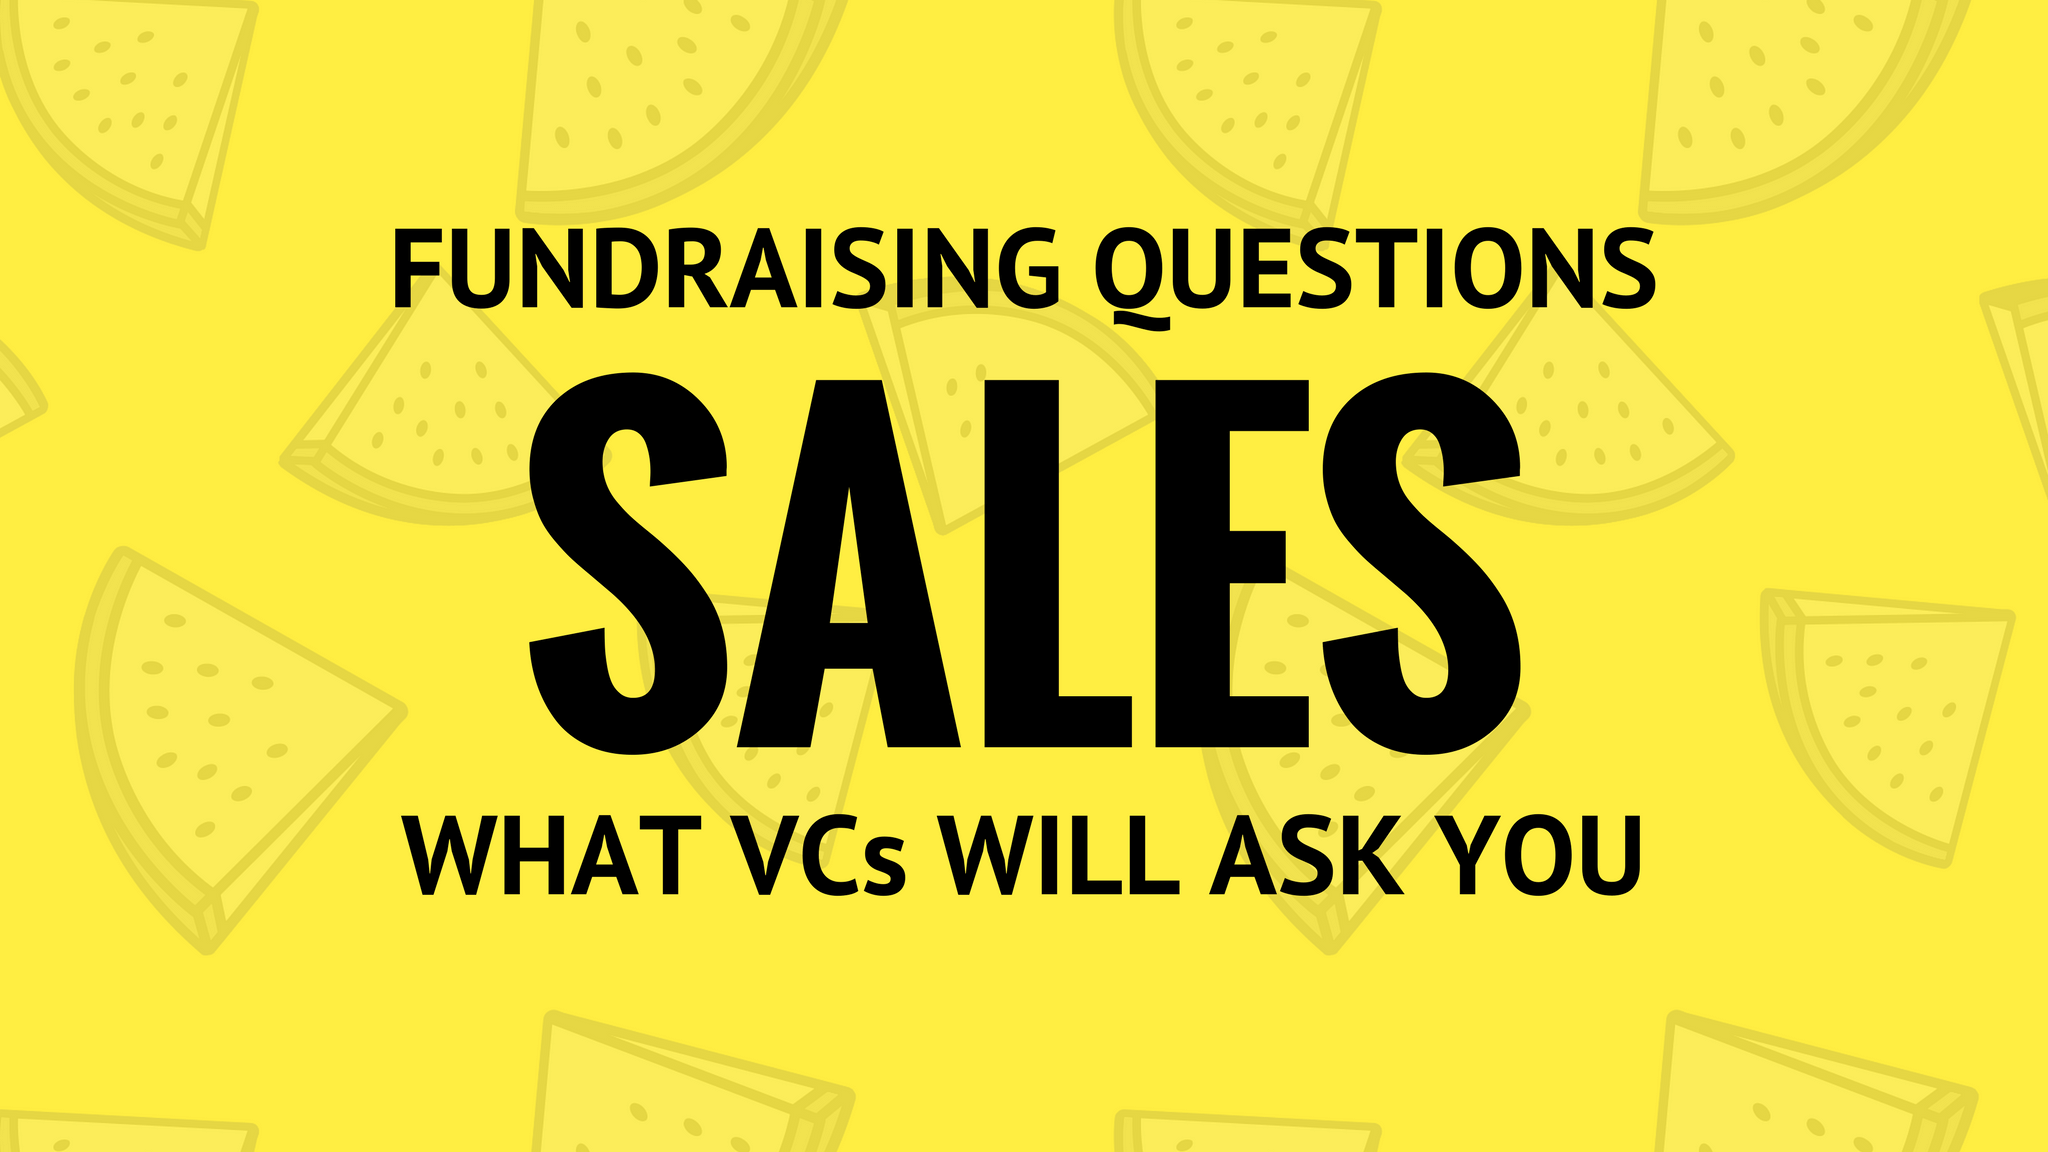 Fundraising sales questions for startups